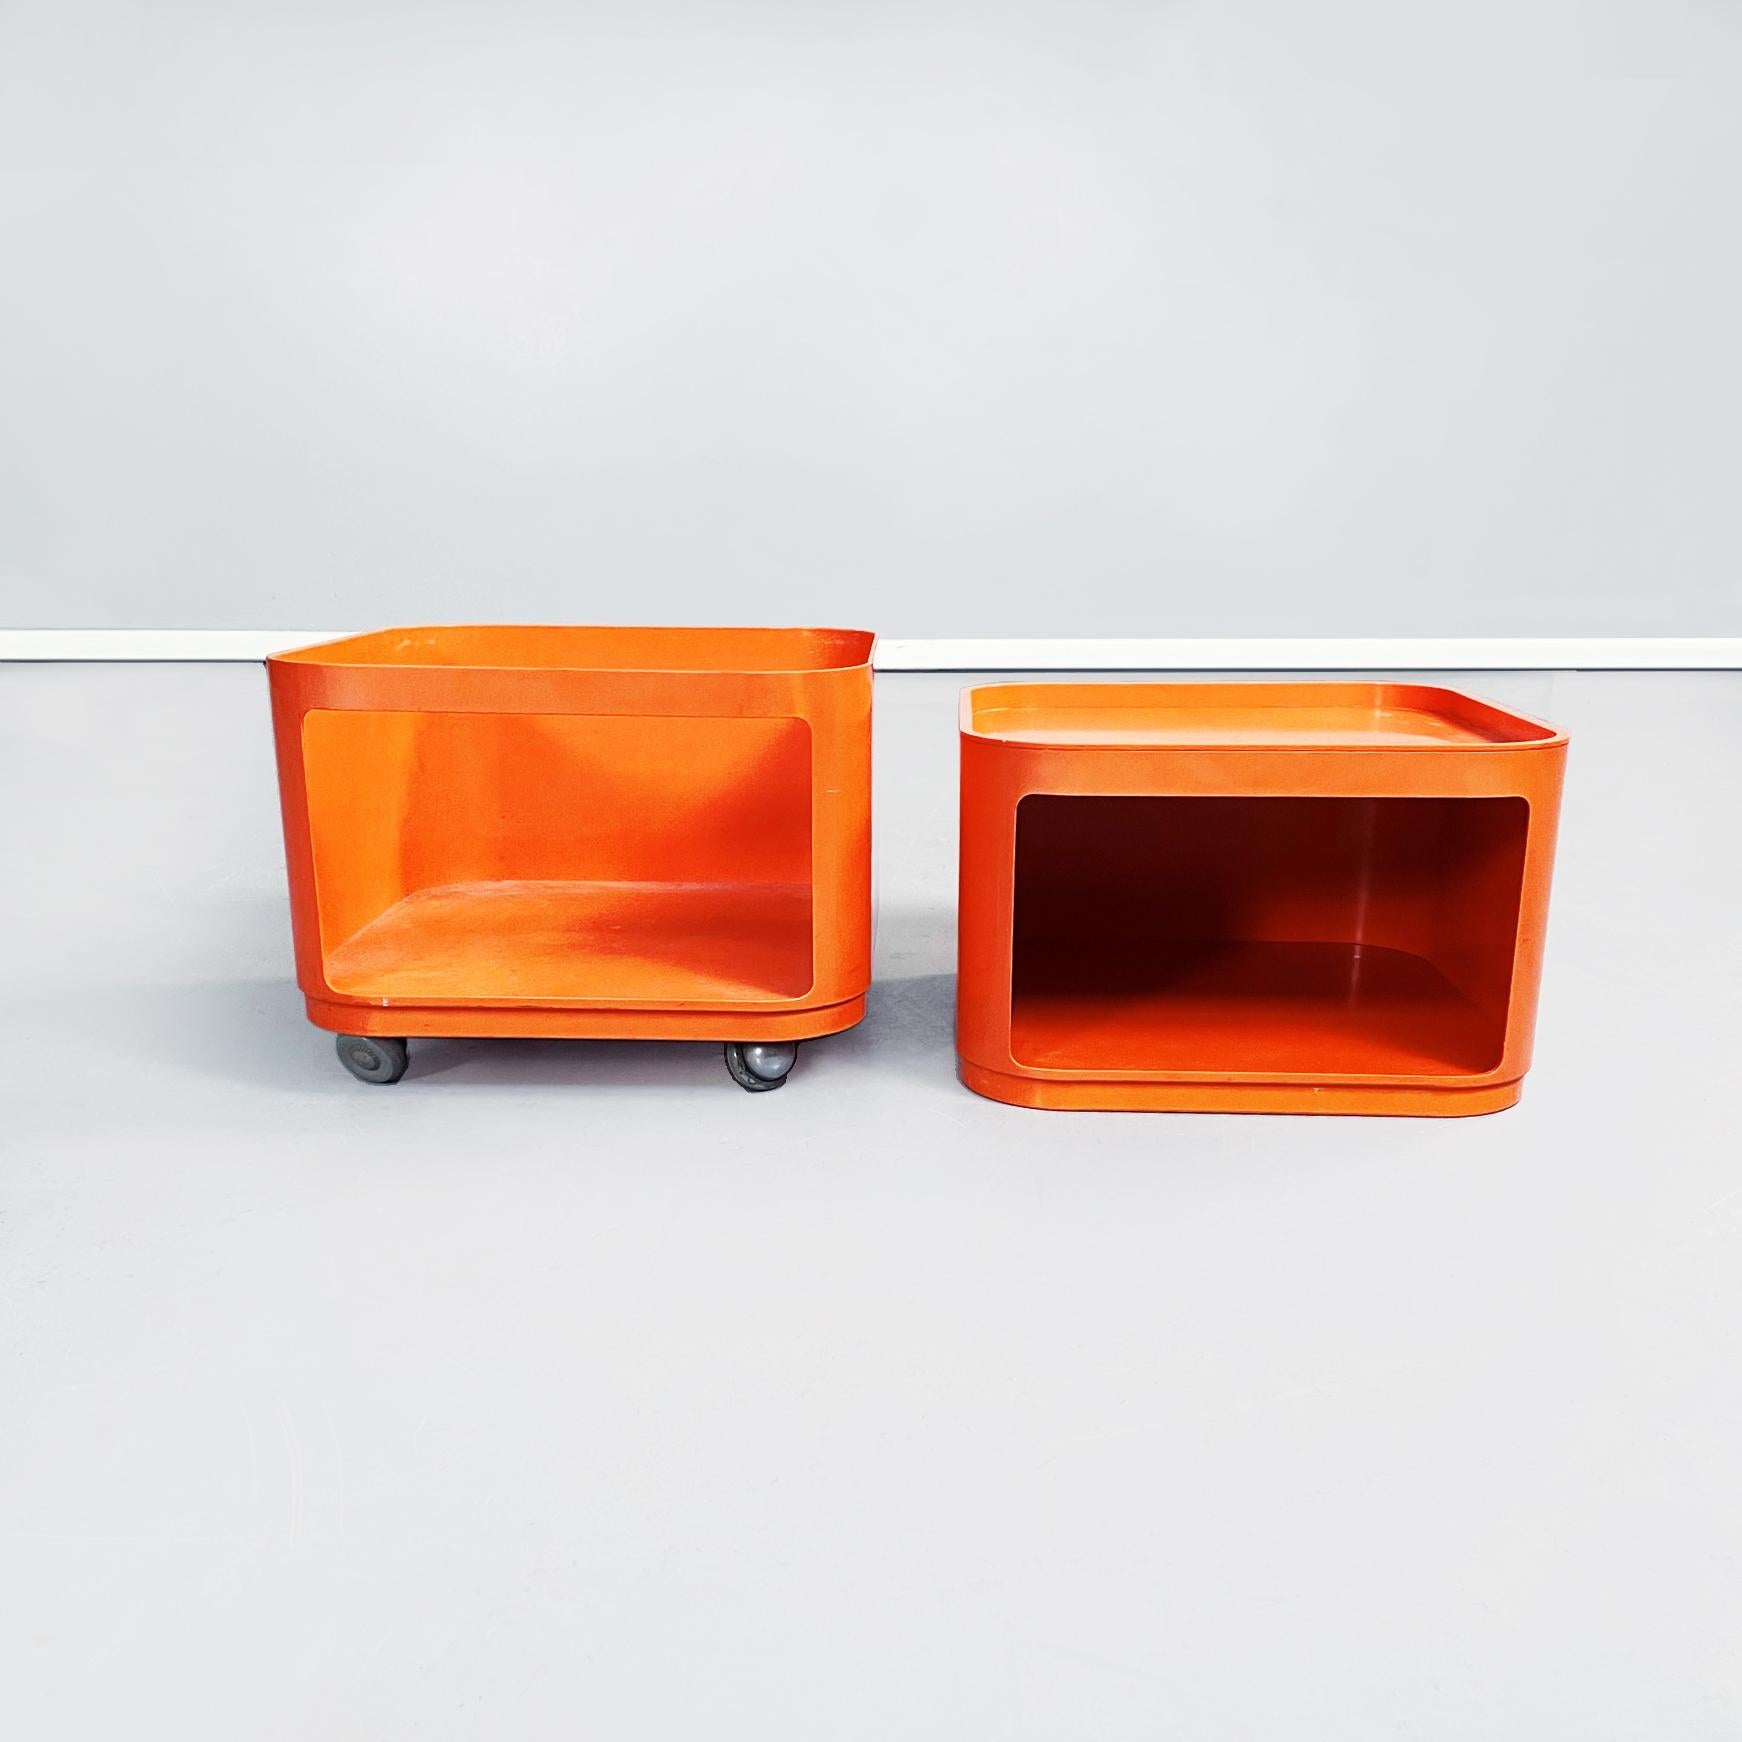 Late 20th Century Italian Midcentury Orange Plastic Chest of Drawers by Castelli for Kartell, 1970